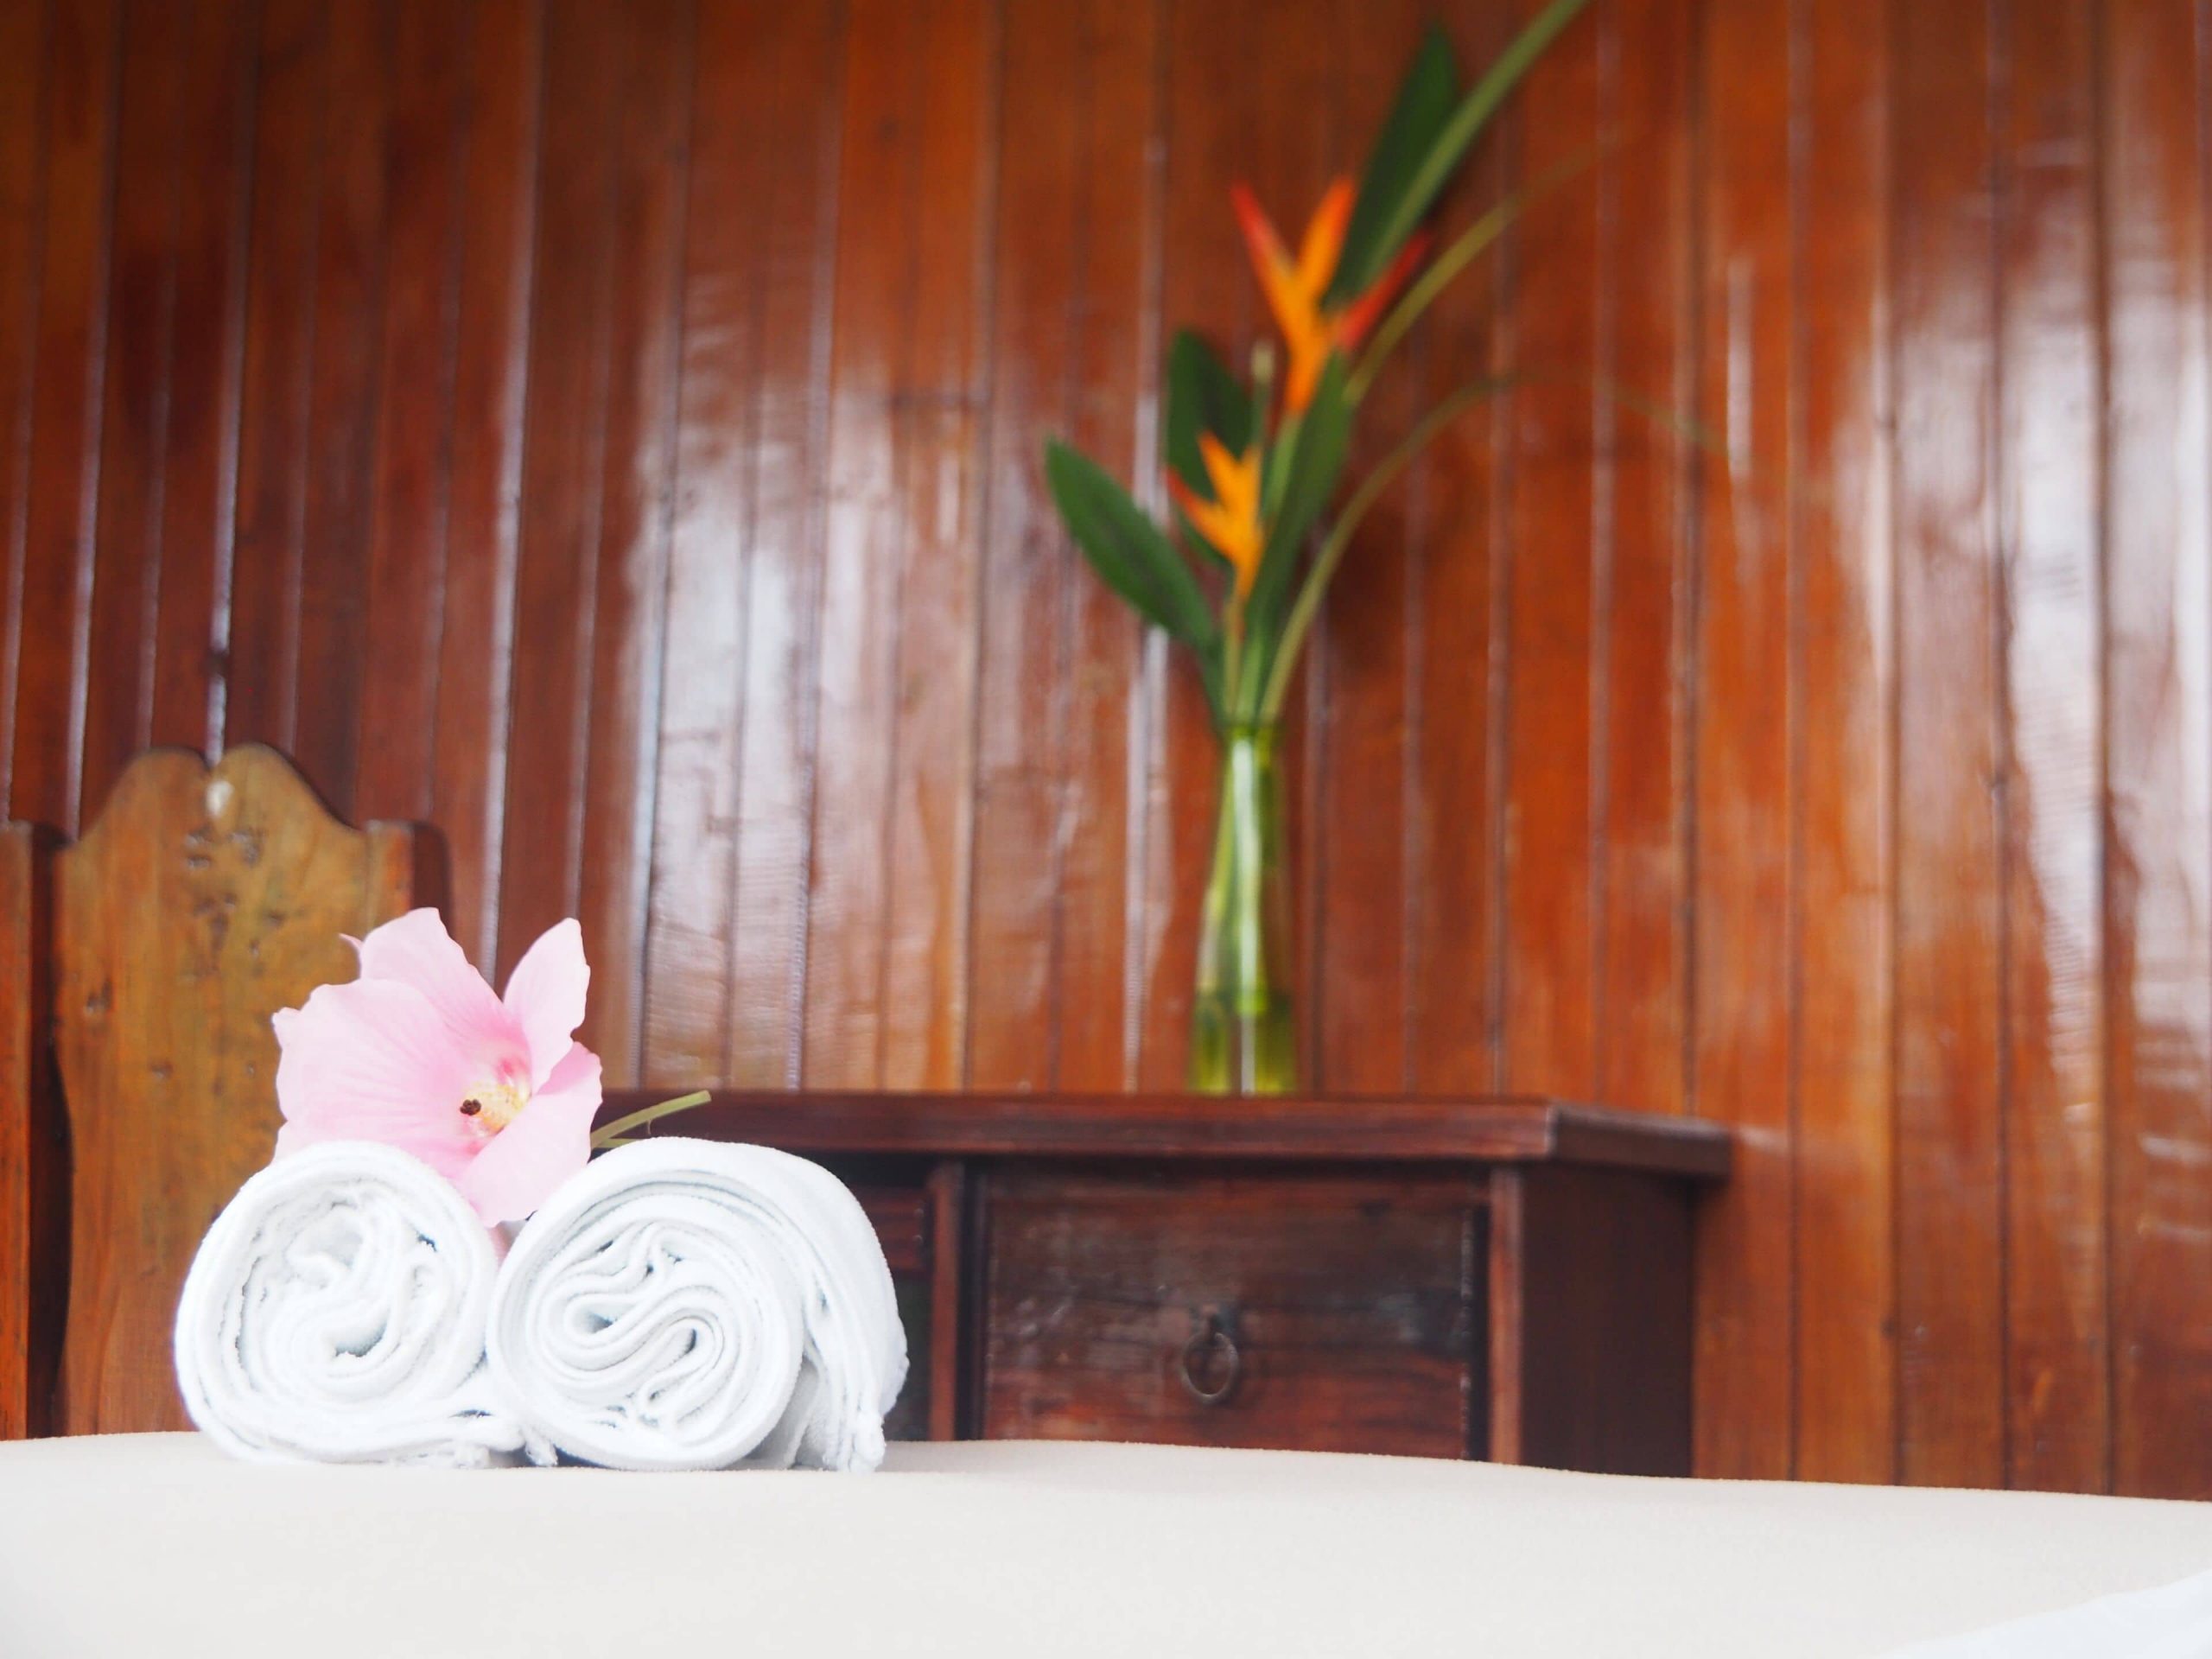 Inside one of the hotel rooms at Essence Arenal in Costa Rica features traditional wooden cabins, white linens, maid service, and colorful flowers.